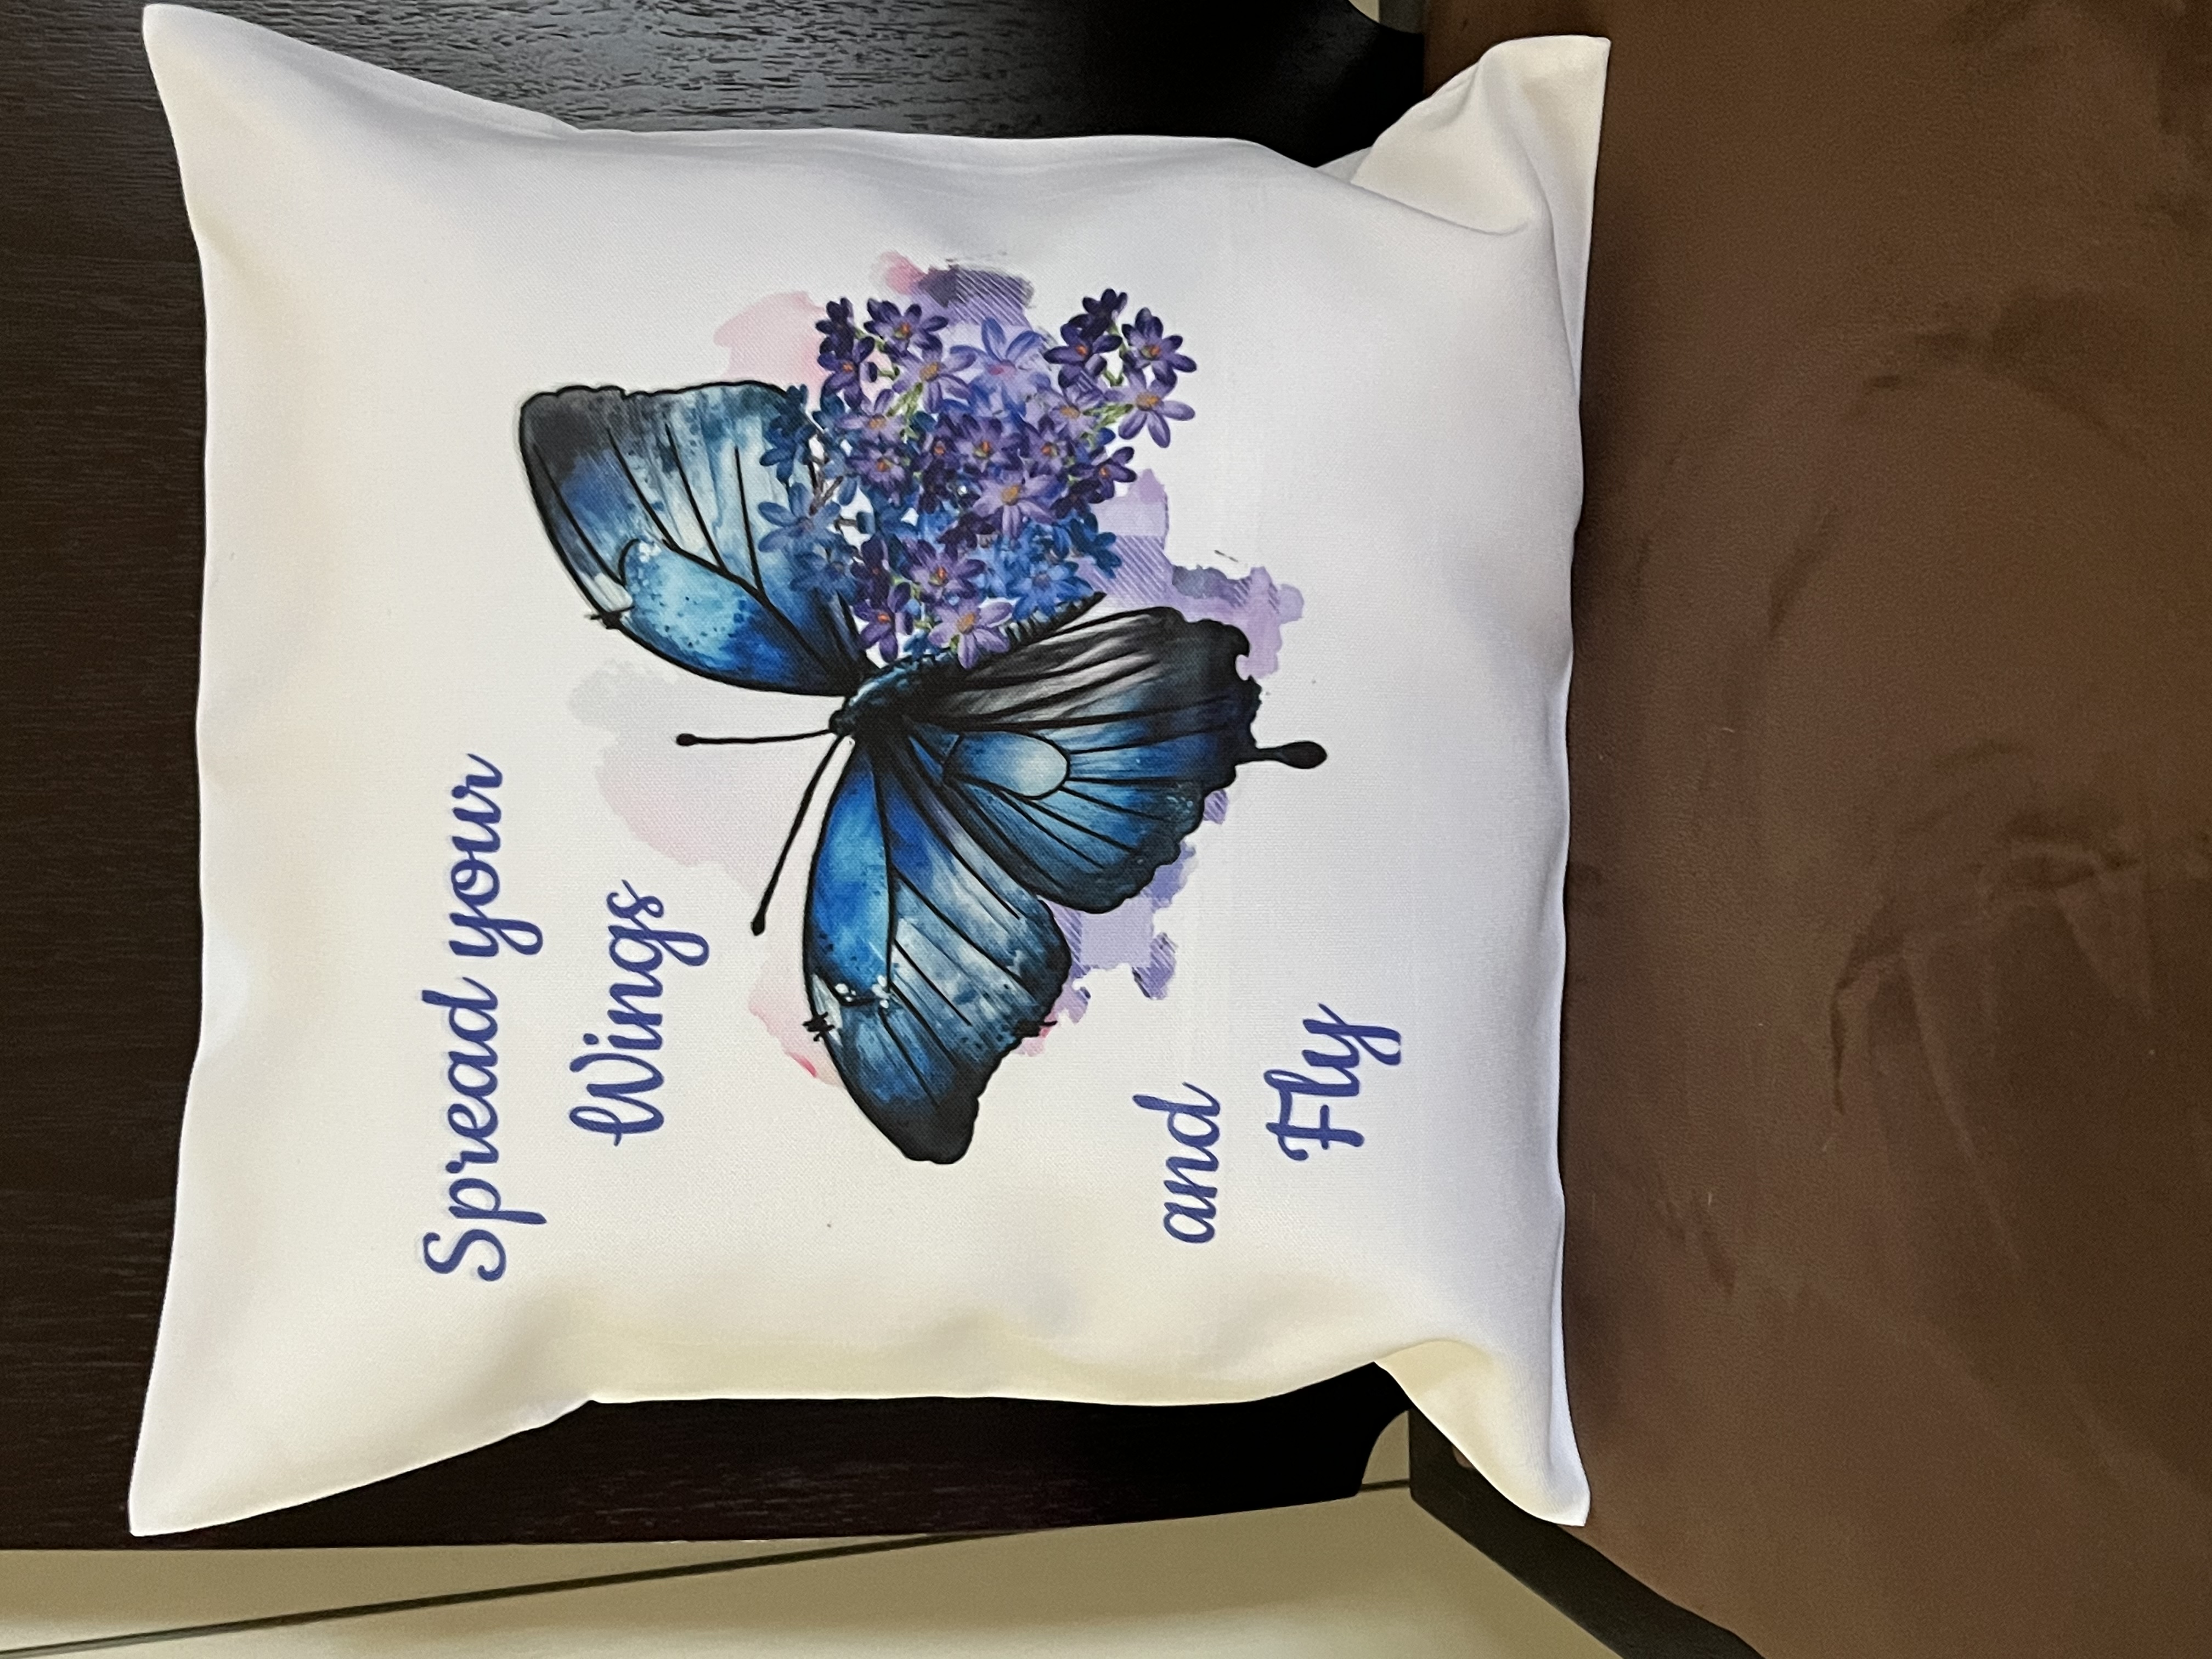 Dye trans pillow sham, uplifting butterfly â€œ Spread your wings and Flyâ€ vibrant colors . Pr